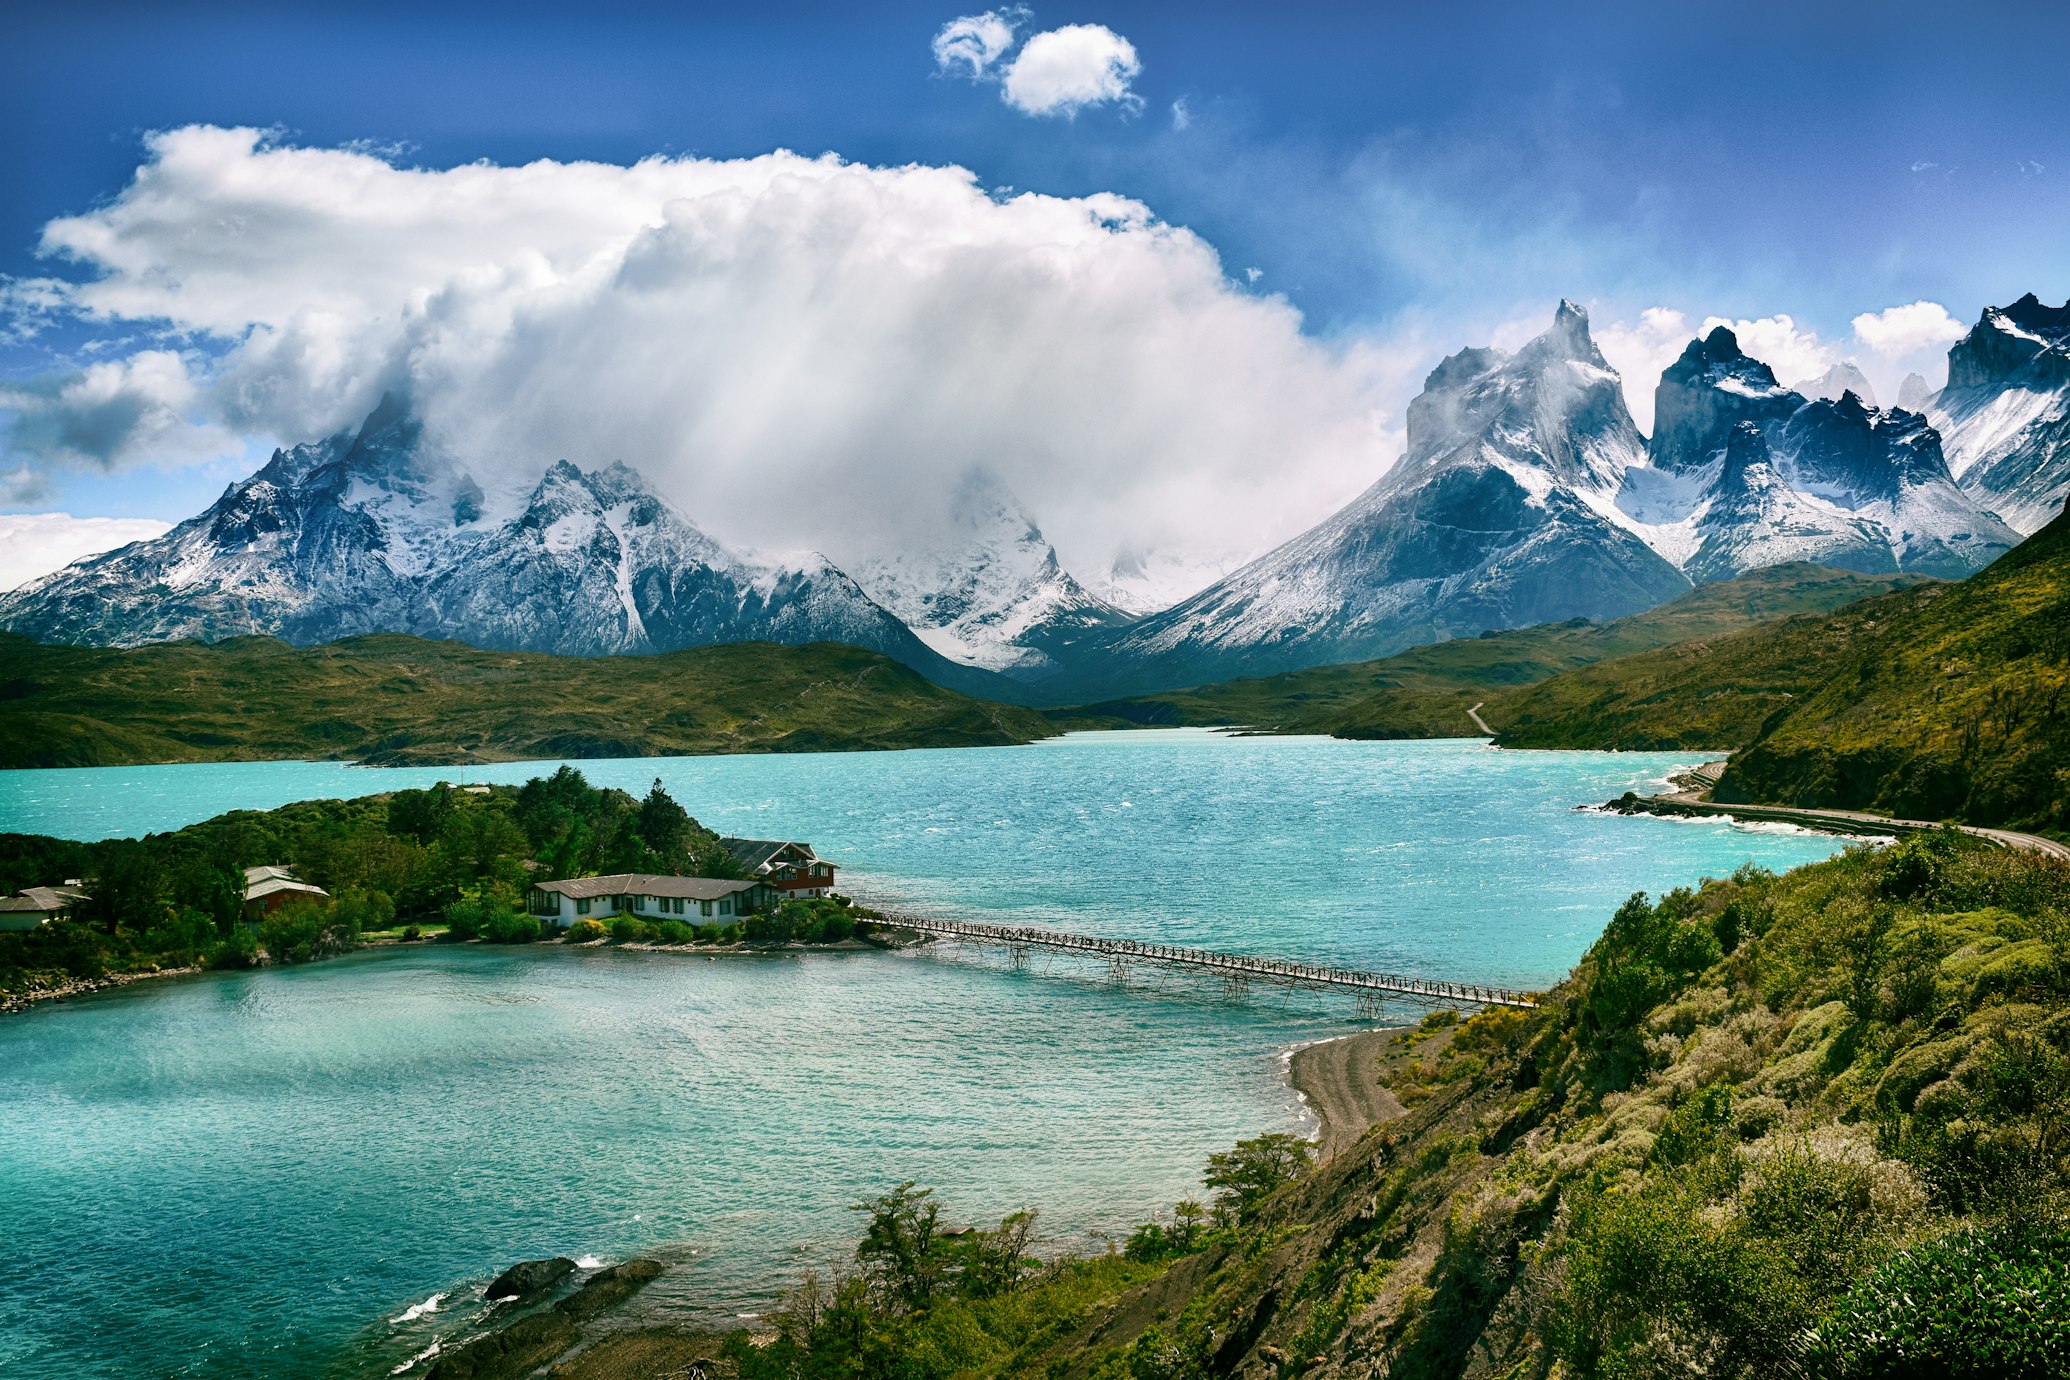 Chile Travel Guide - Attractions, What to See, Do, Costs, FAQs